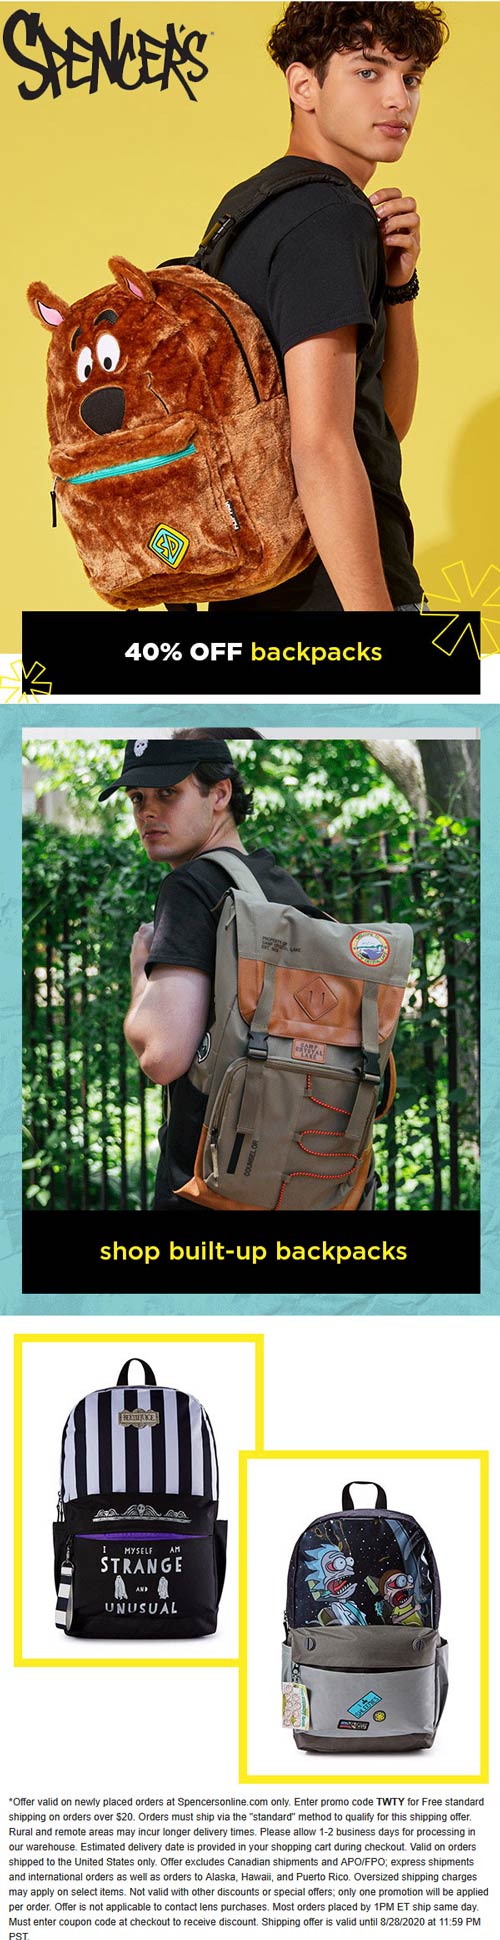 Spencers stores Coupon  40% off backpacks at Spencers + free shipping via promo code TWTY #spencers 